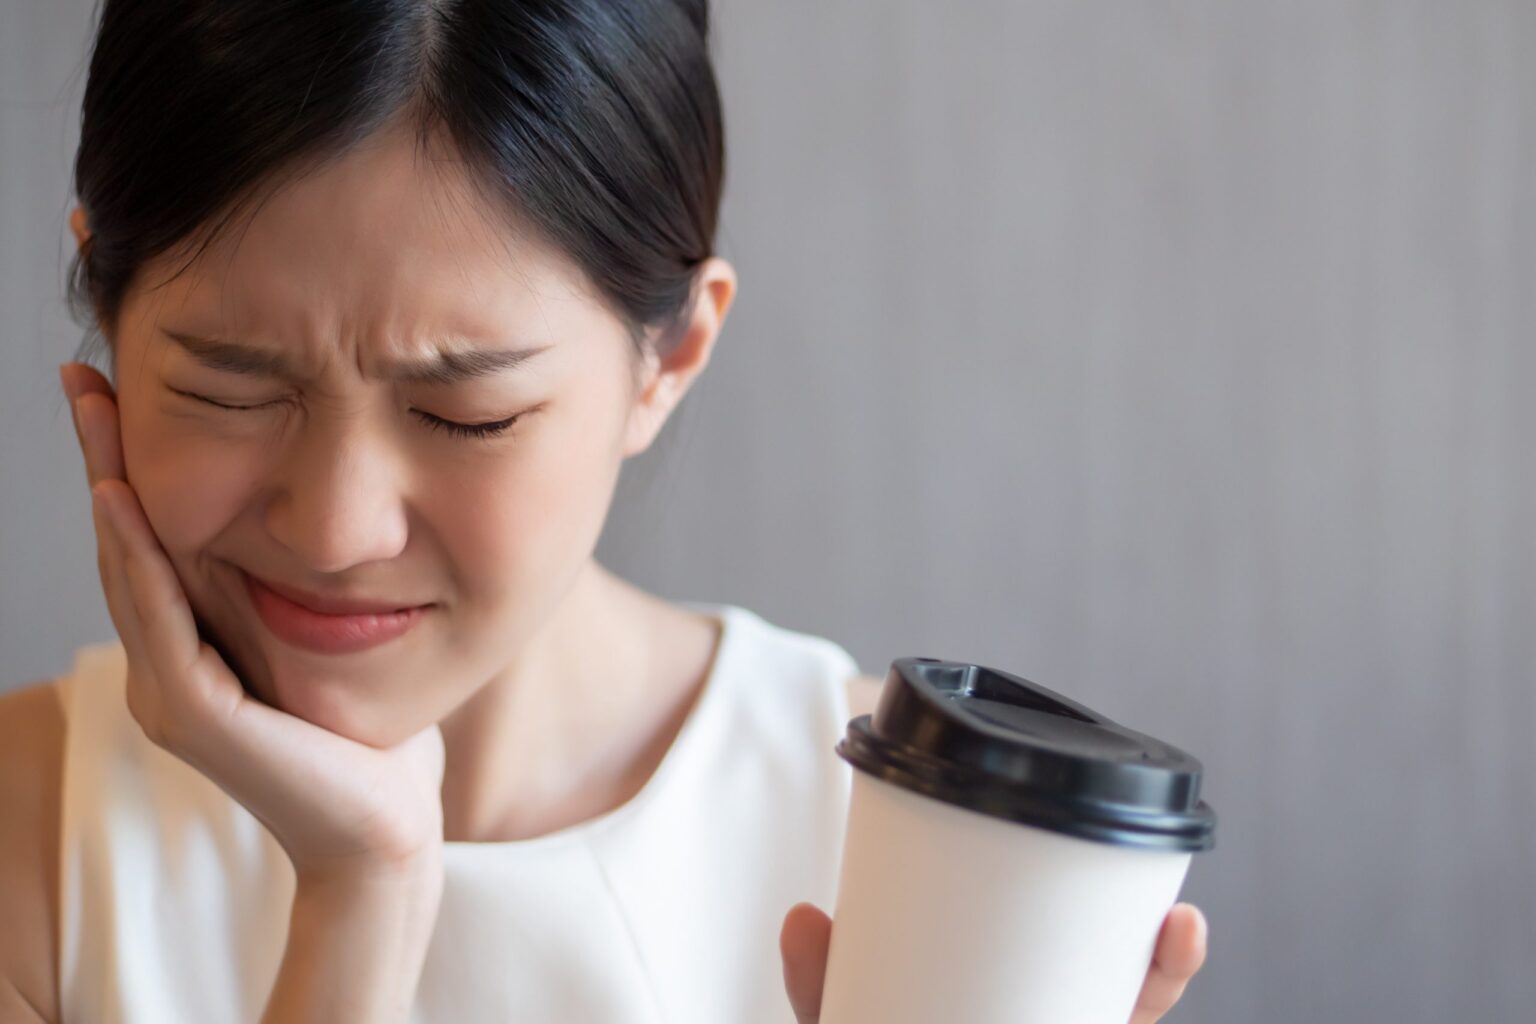 Asian woman grabbed her cheek because of strong tooth pain, holding a coffe cup in her hand